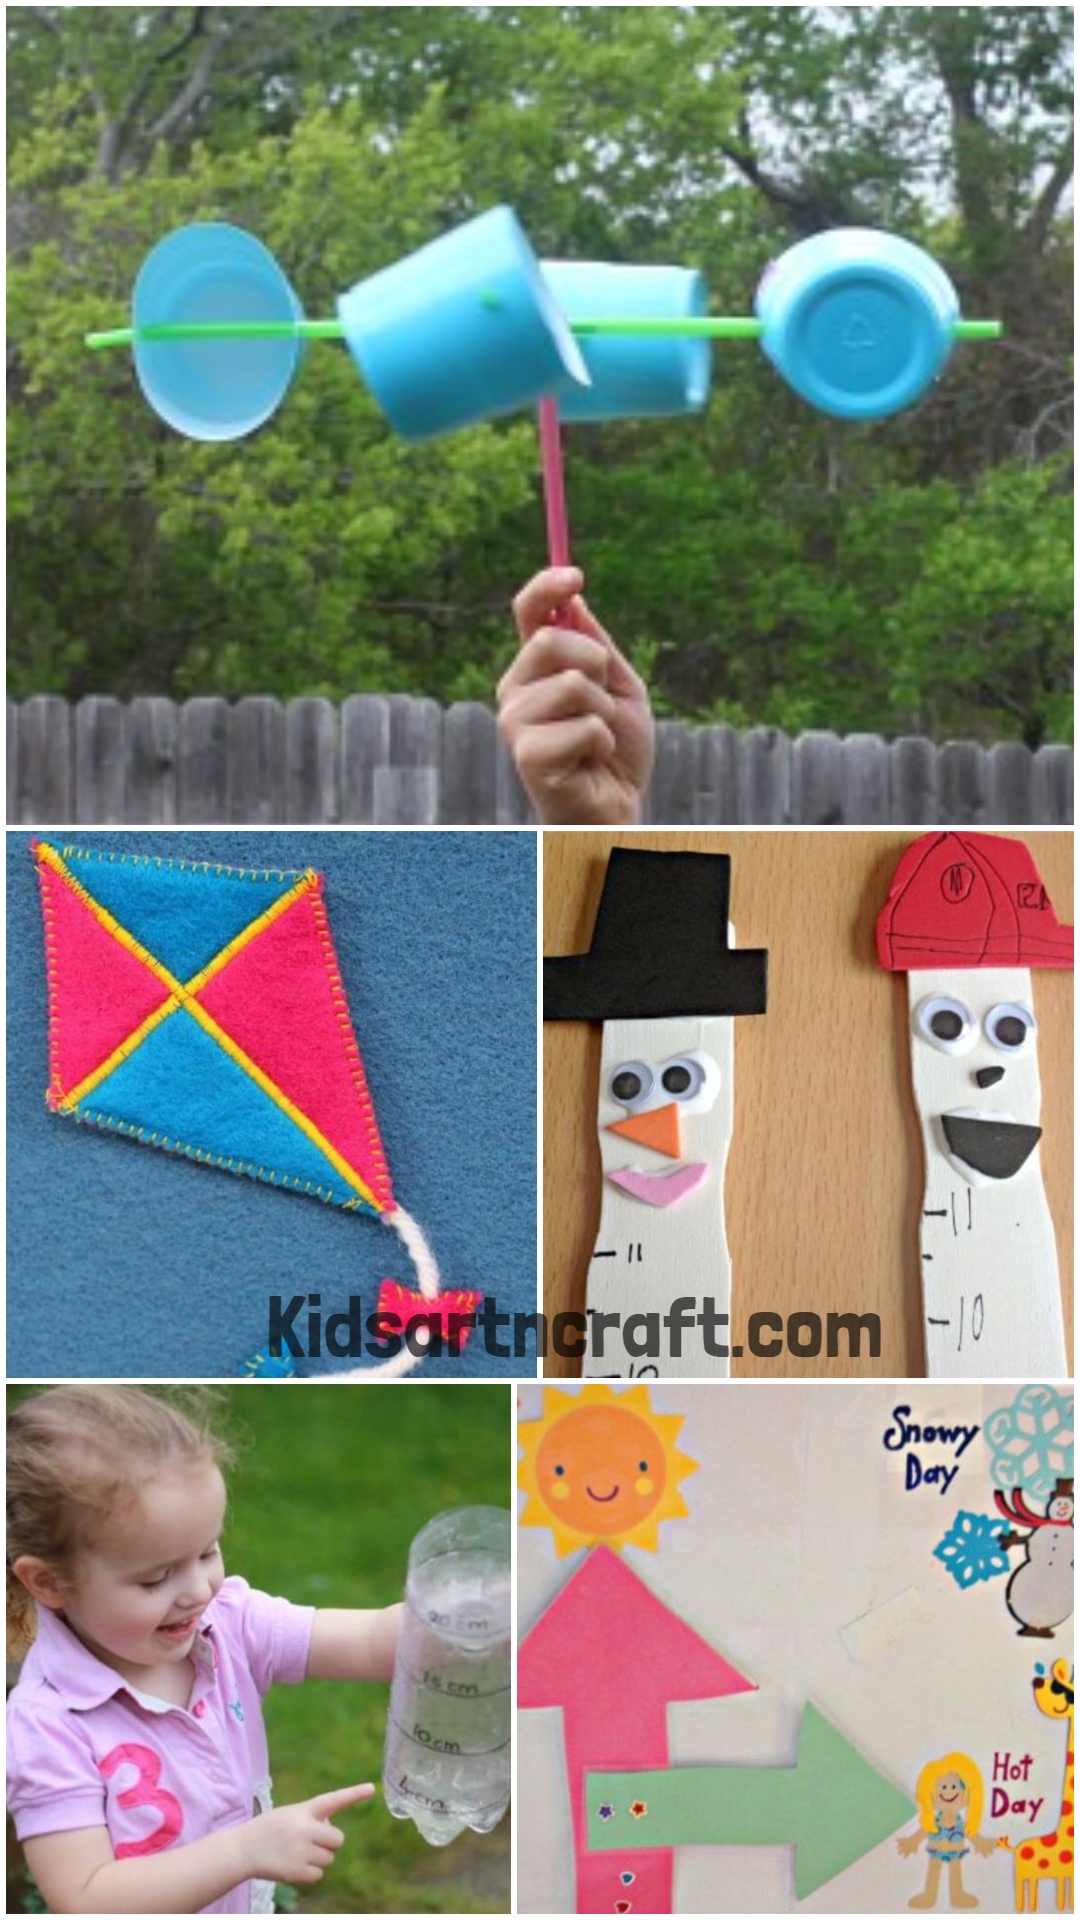 Scientific Learning About Weather For Kids